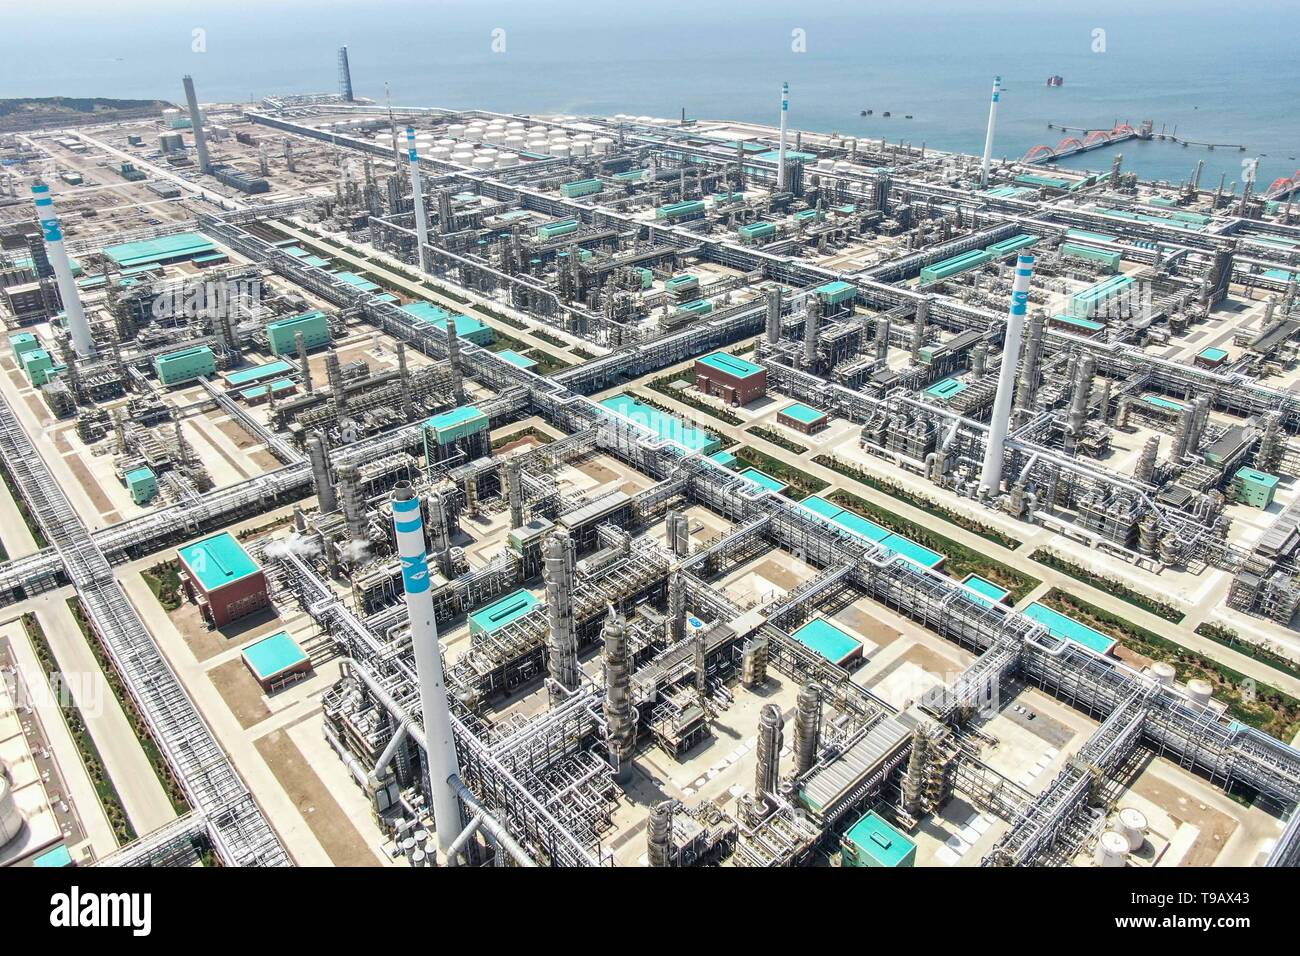 Dalian. 17th May, 2019. Aerial photo taken on May 17, 2019 shows the industrial park of the Hengli Petrochemical (Dalian) Refining Co., Ltd. on the Changxing Island in Dalian City, northeast China's Liaoning Province. The private-owned Hengli Petrochemical (Dalian) Refining Co., Ltd. achieved full operation in its 20 million tonnes per year refinery and chemical complex in Dalian, the company said Friday. Credit: Pan Yulong/Xinhua/Alamy Live News Stock Photo